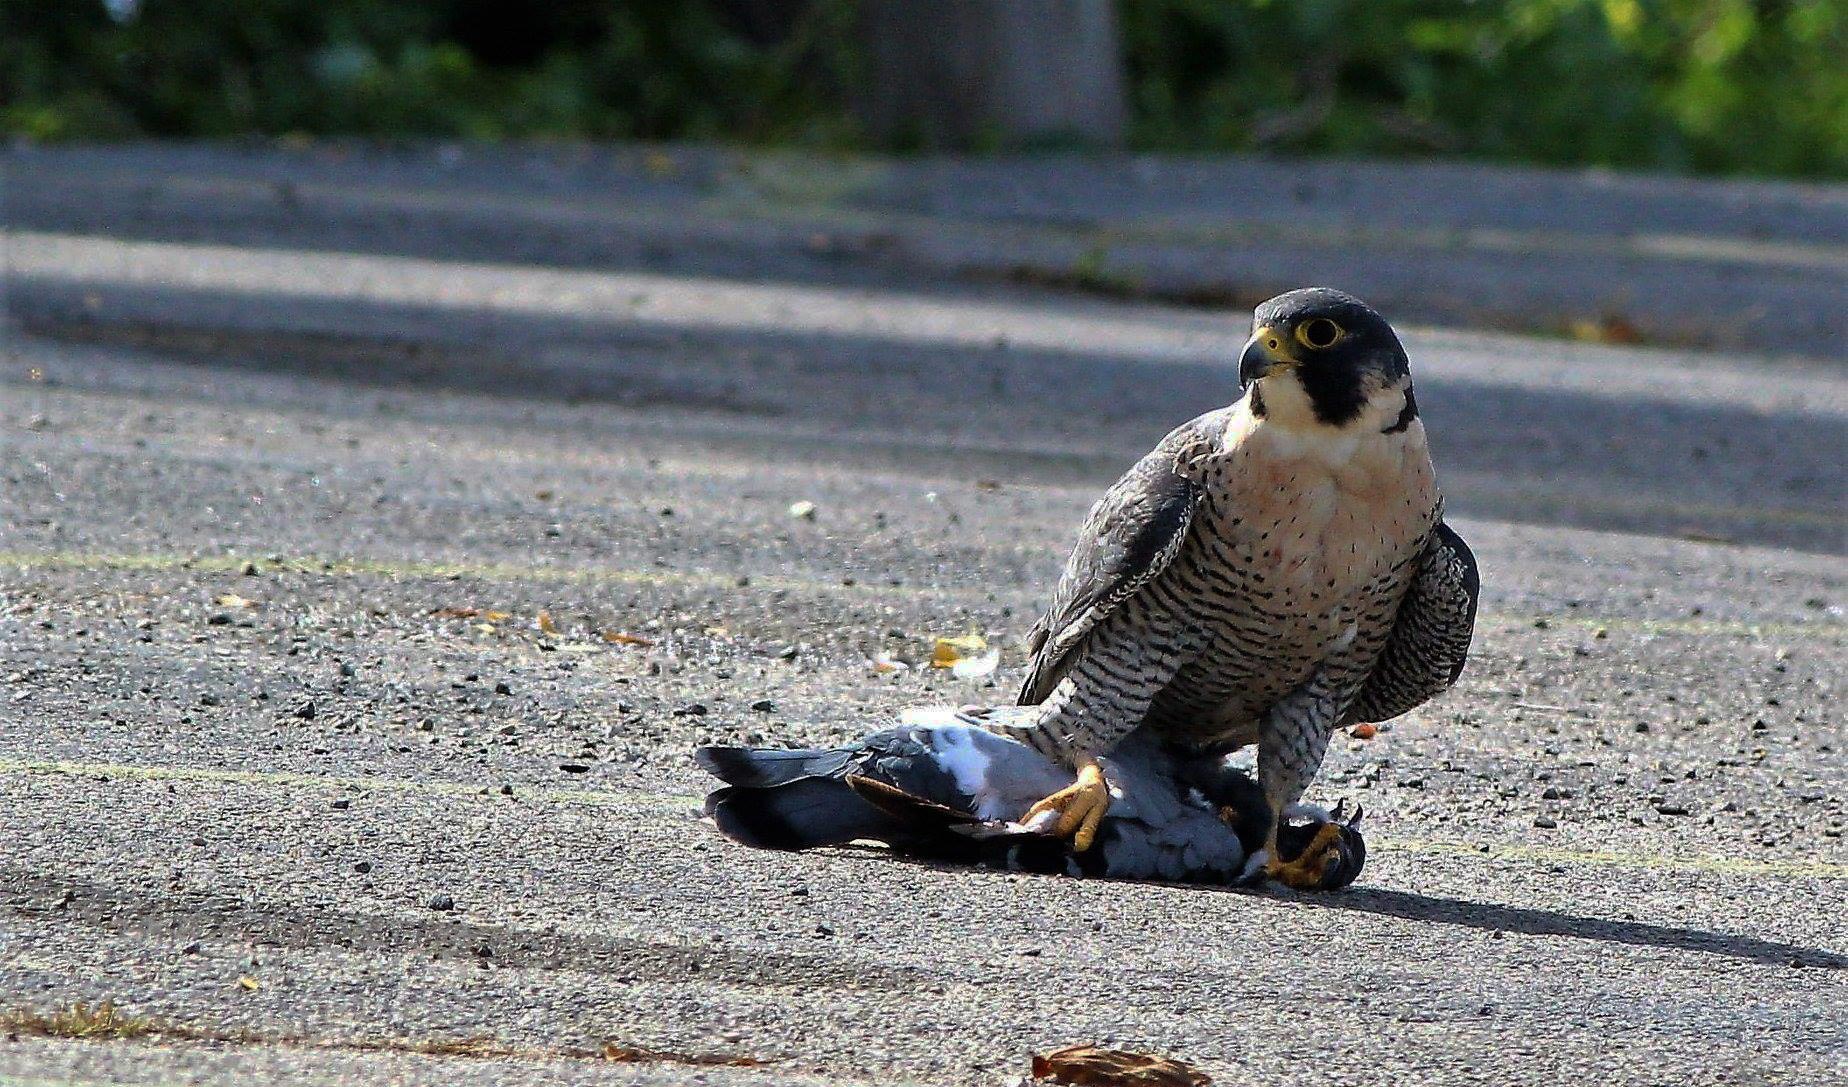 A peregrine falcon with its prey in its talons.